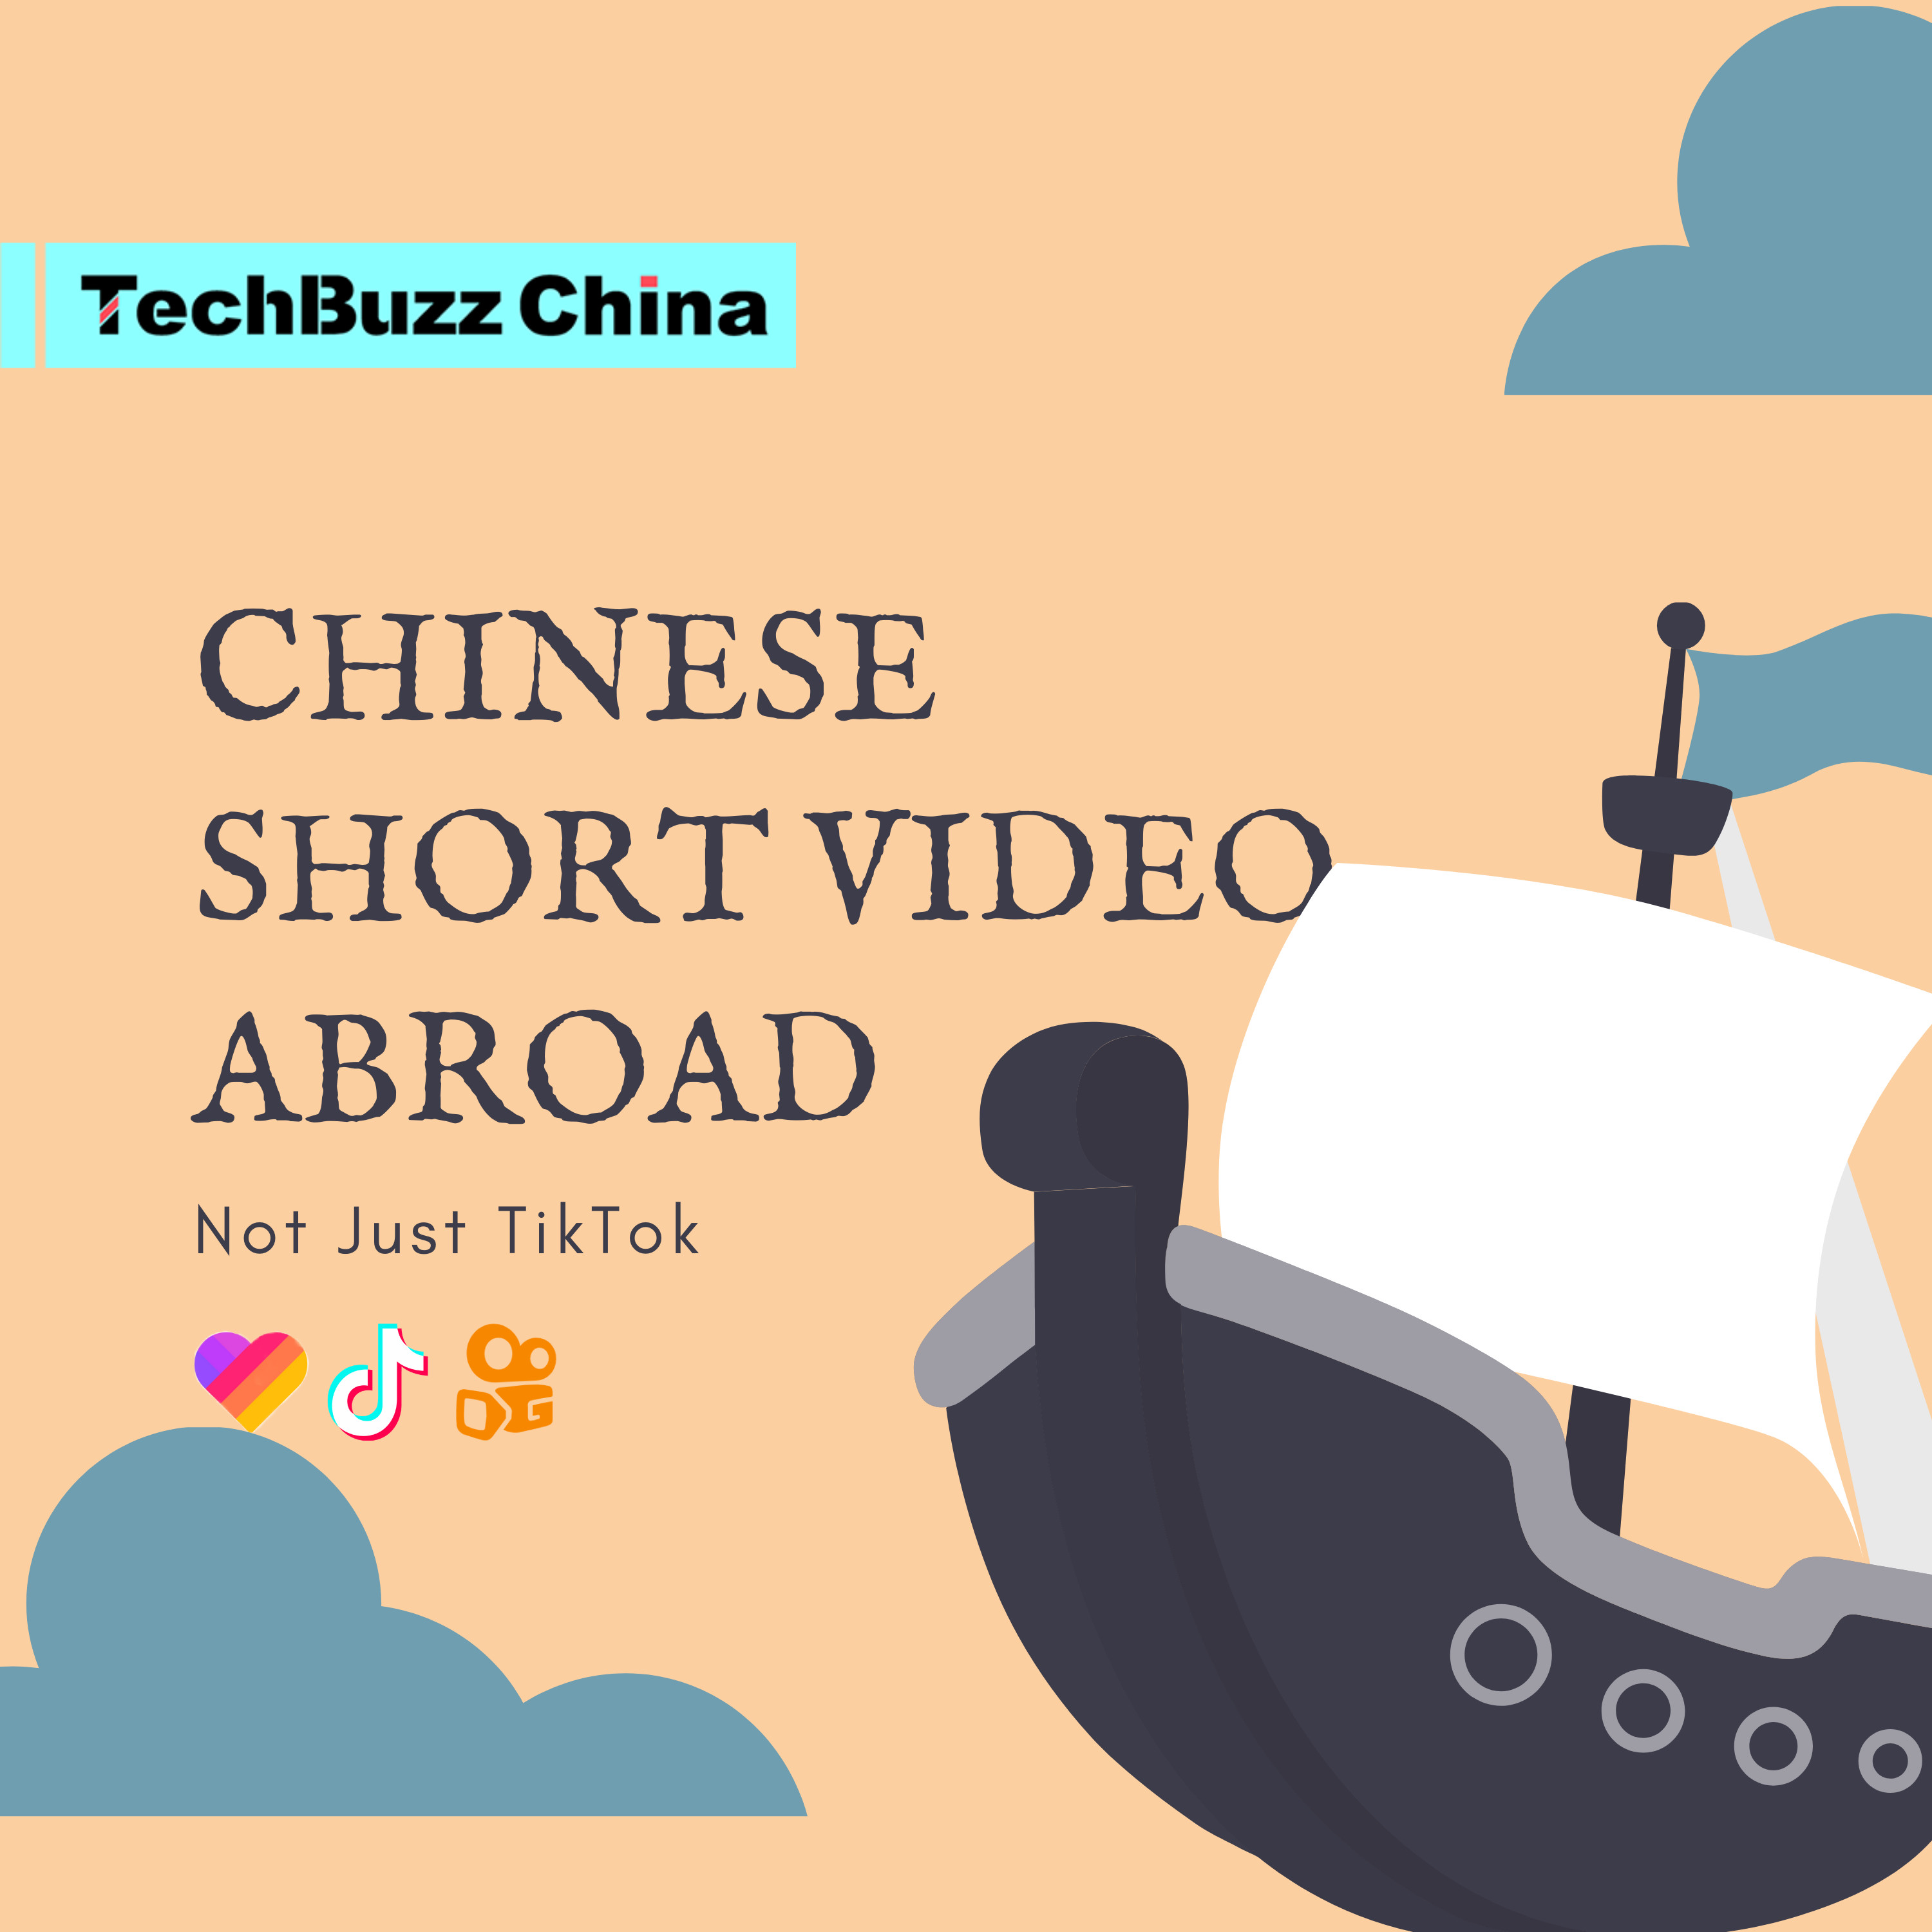 Ep. 56: Not just TikTok: A short history of Chinese short video abroad